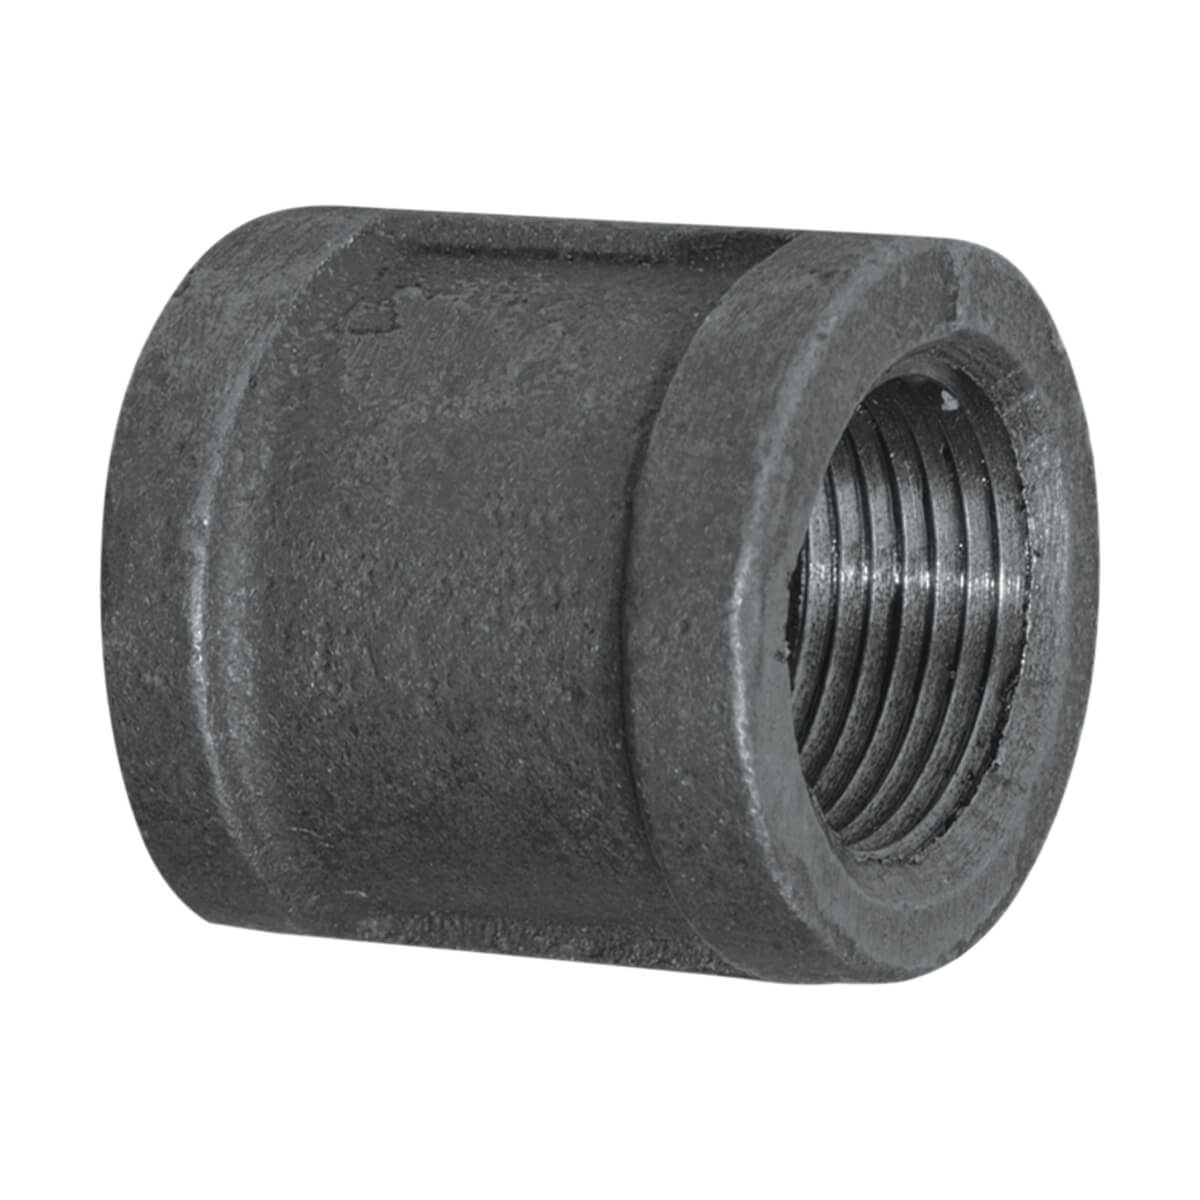 Fitting Black Iron Coupling - 1-in